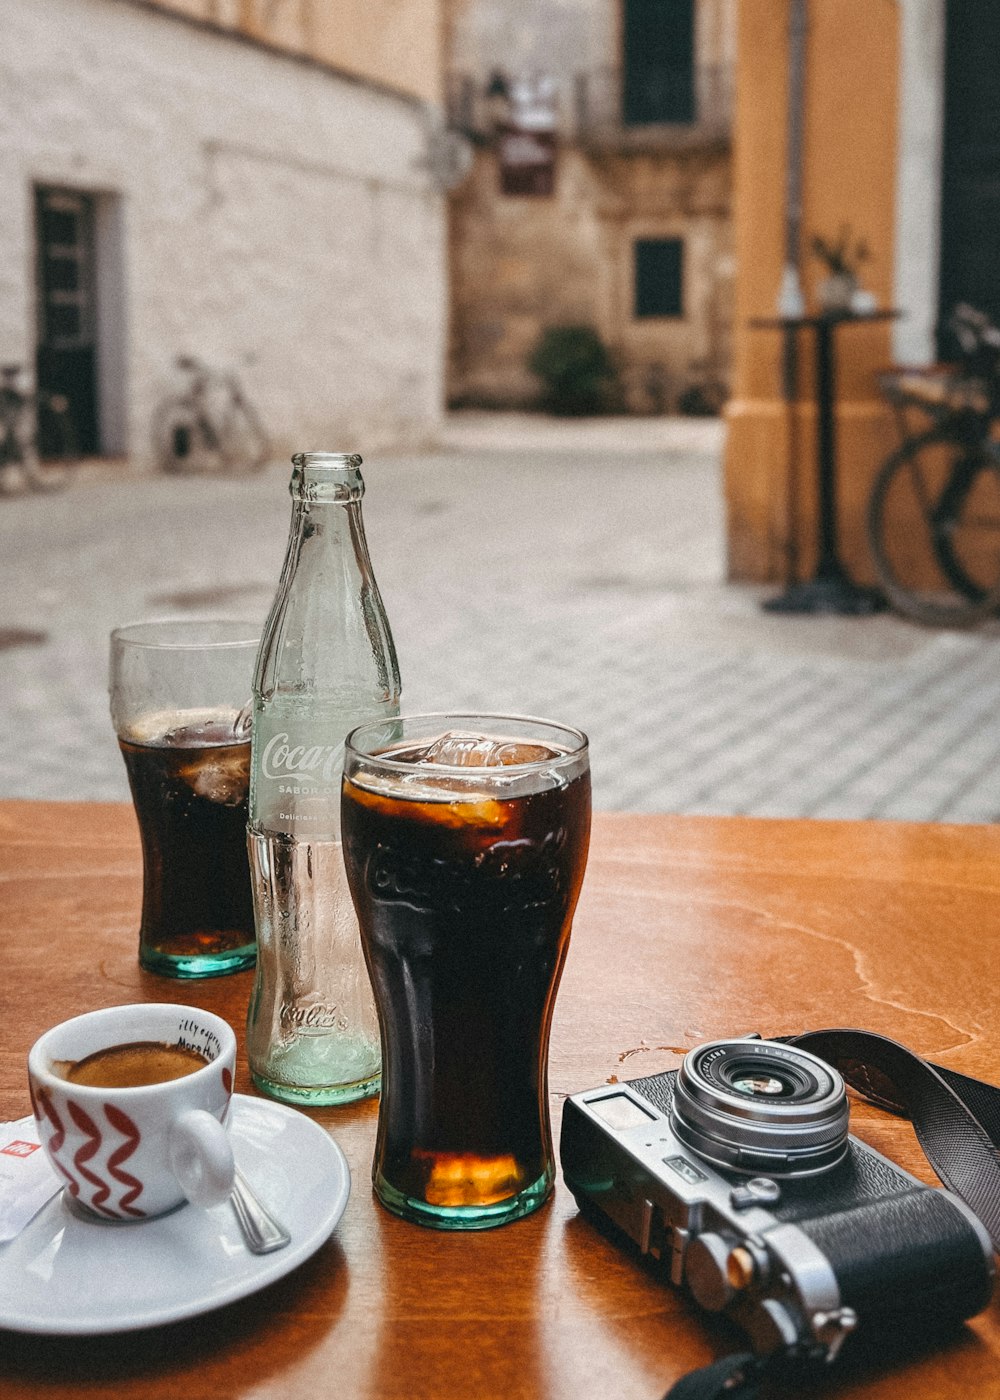 a camera, a cup of coffee, and a bottle of soda on a table